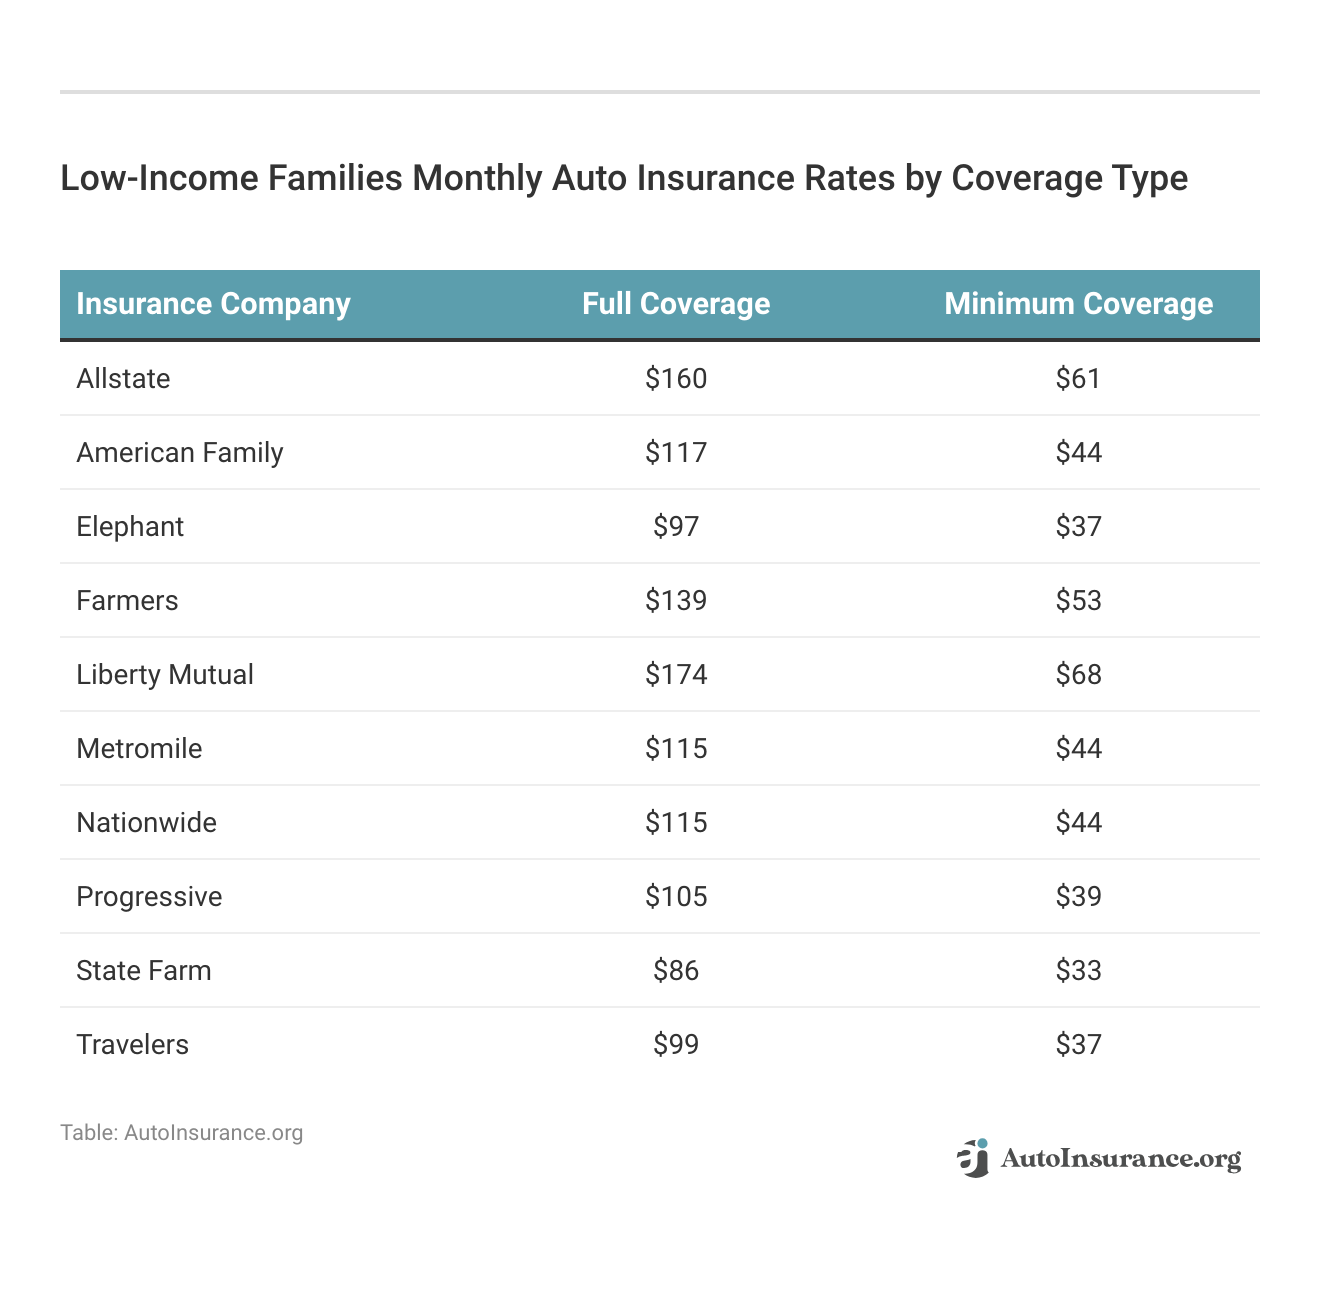 <h3>Low-Income Families Monthly Auto Insurance Rates by Coverage Type</h3>